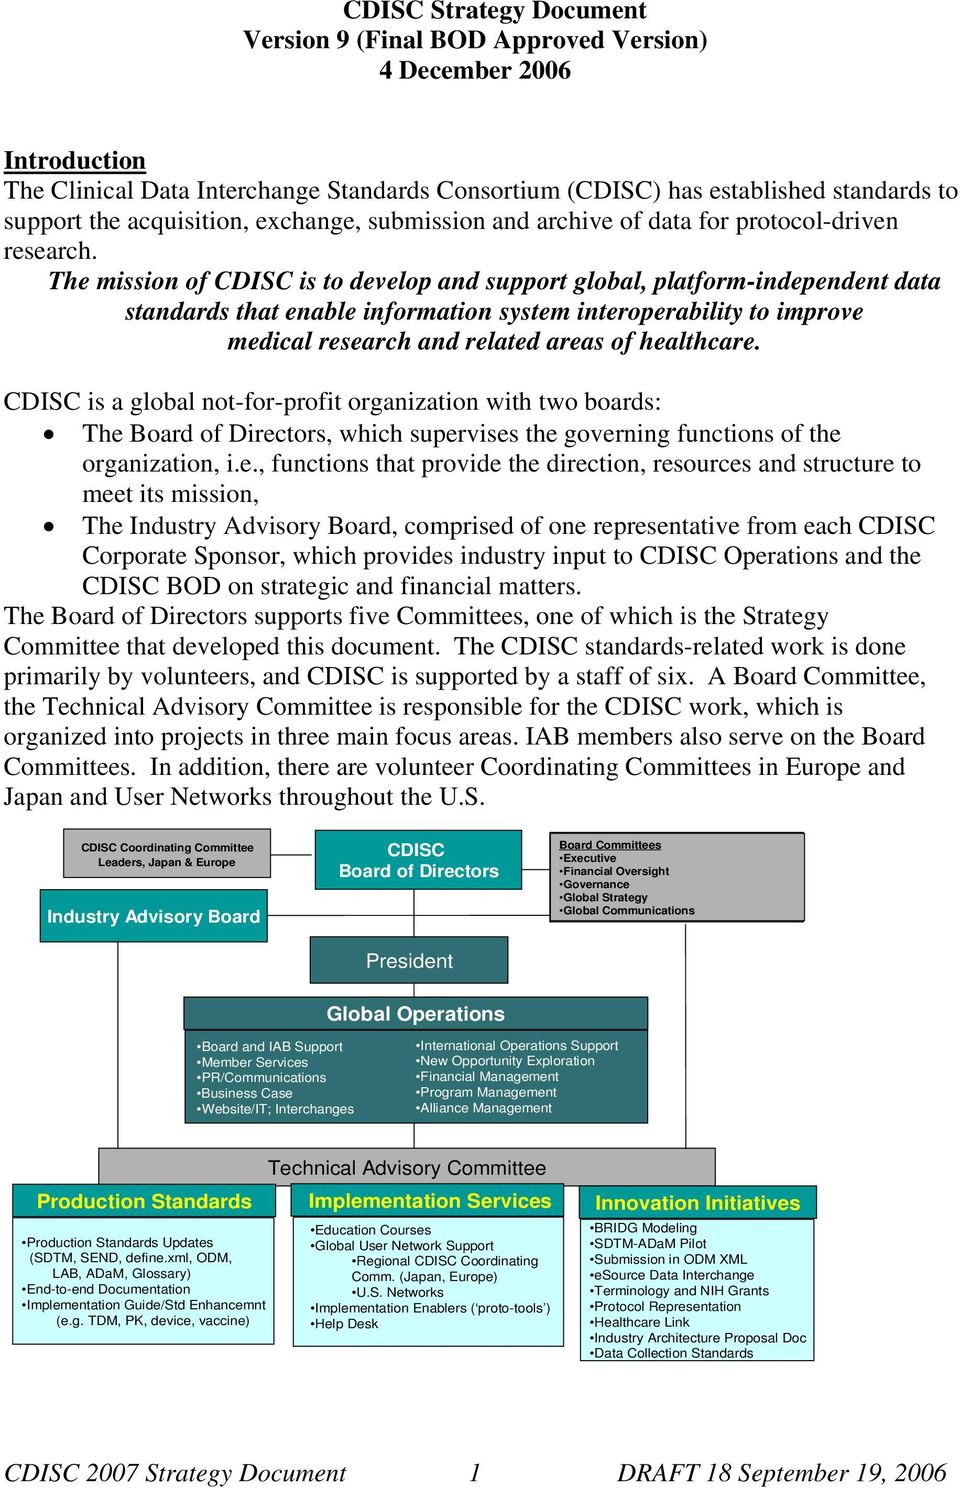 The mission of CDISC is to develop and support global, platform-independent data standards that enable information system interoperability to improve medical research and related areas of healthcare.